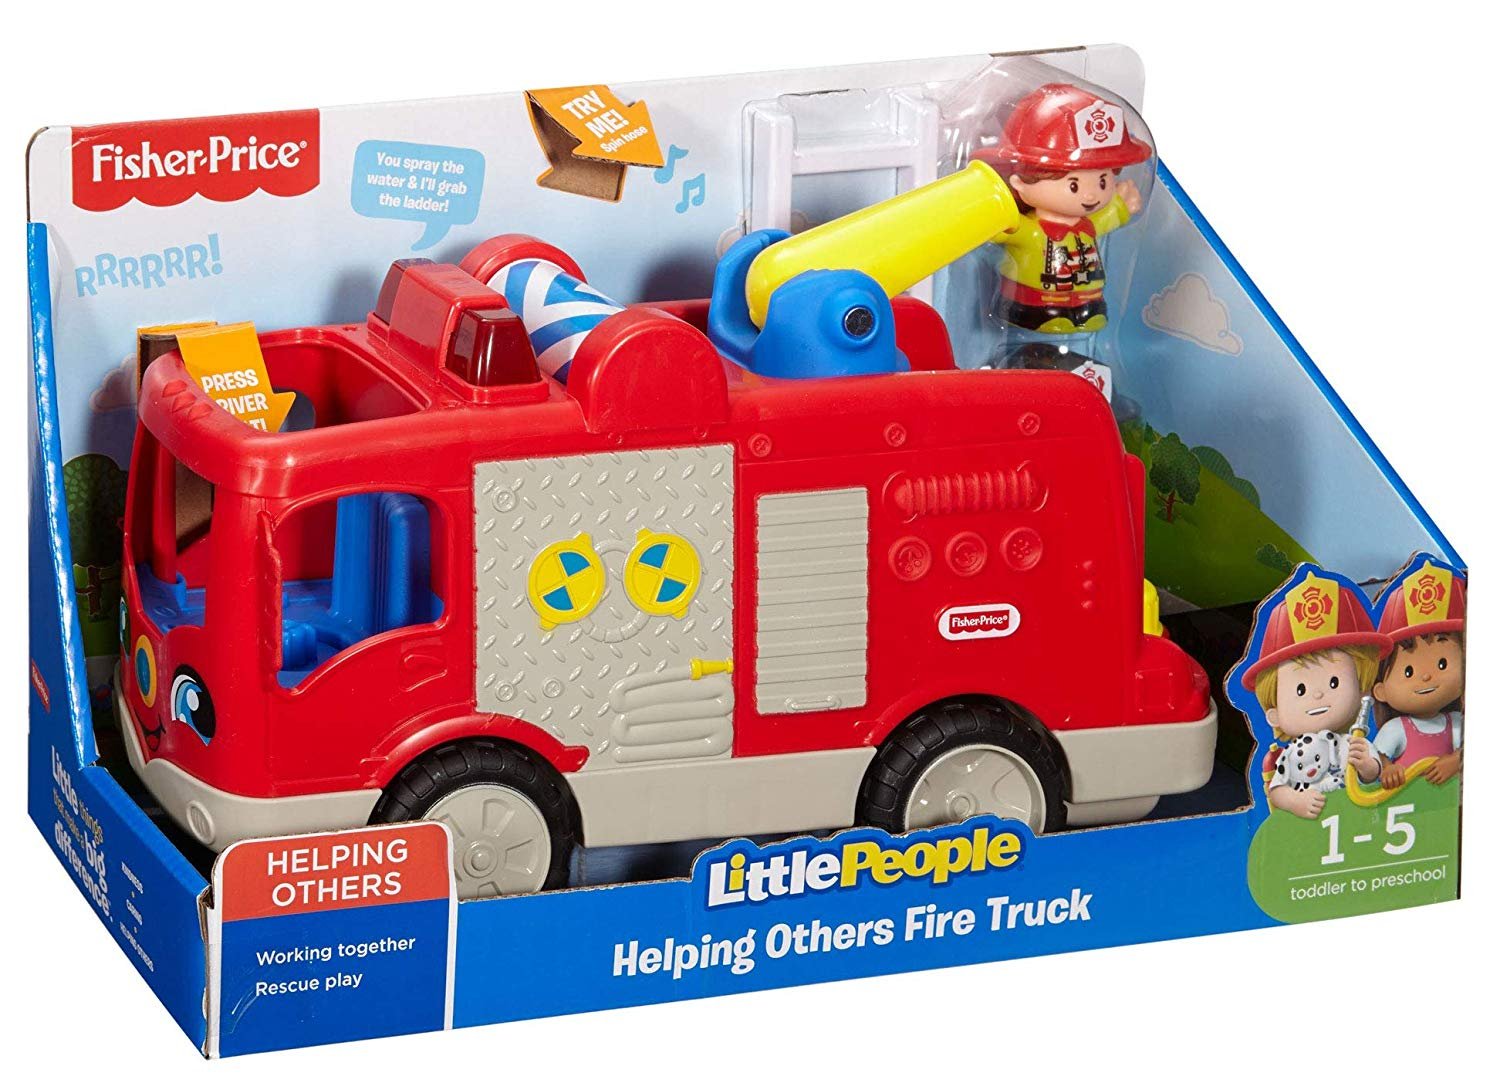 Fisher Price Little People Large Lead Vehicles Fire Truck